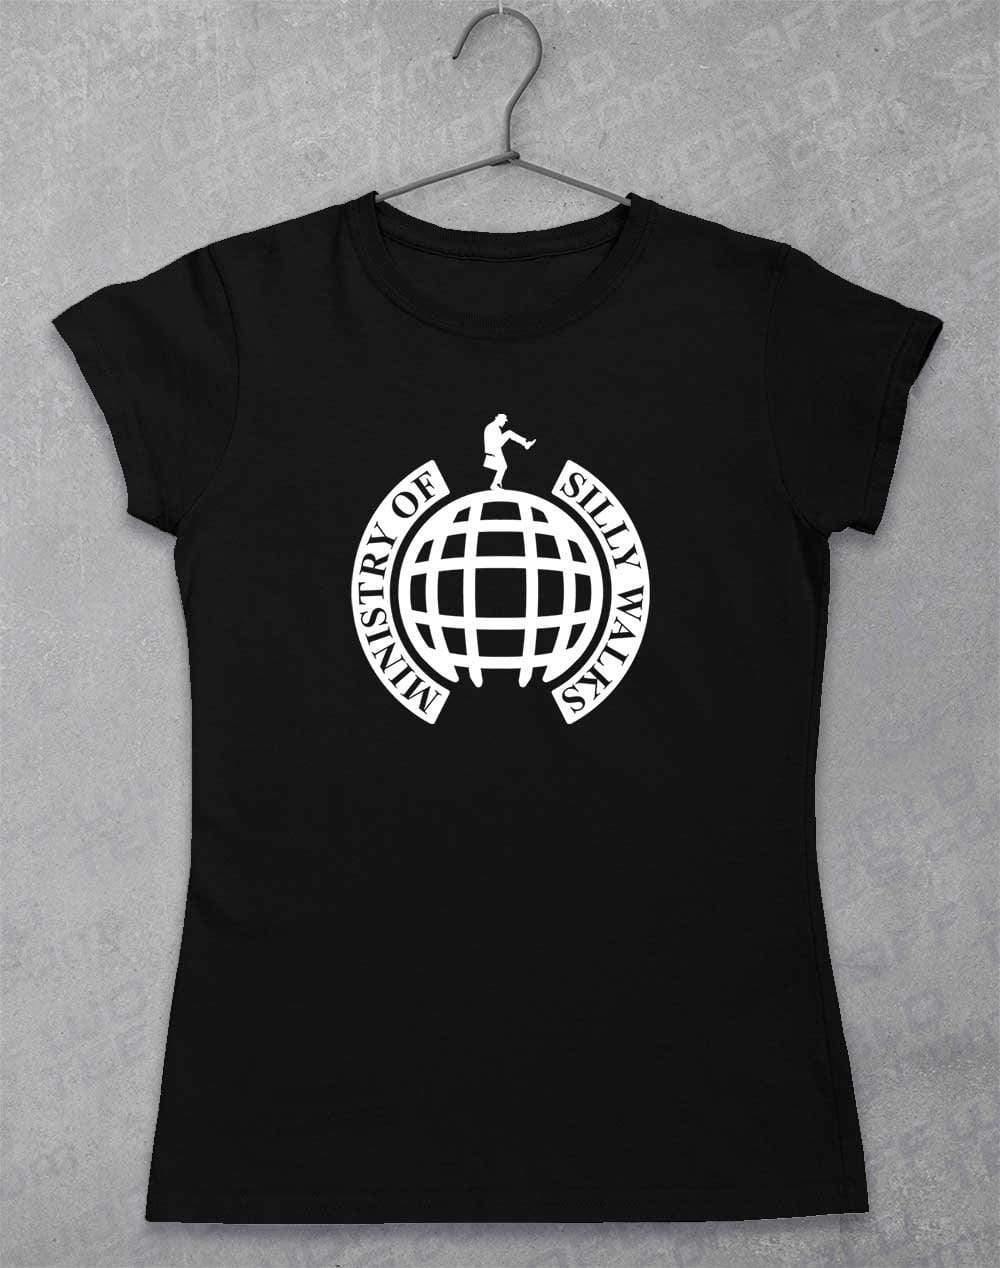 Ministry of Silly Walks Womens T-Shirt 8-10 / Black  - Off World Tees